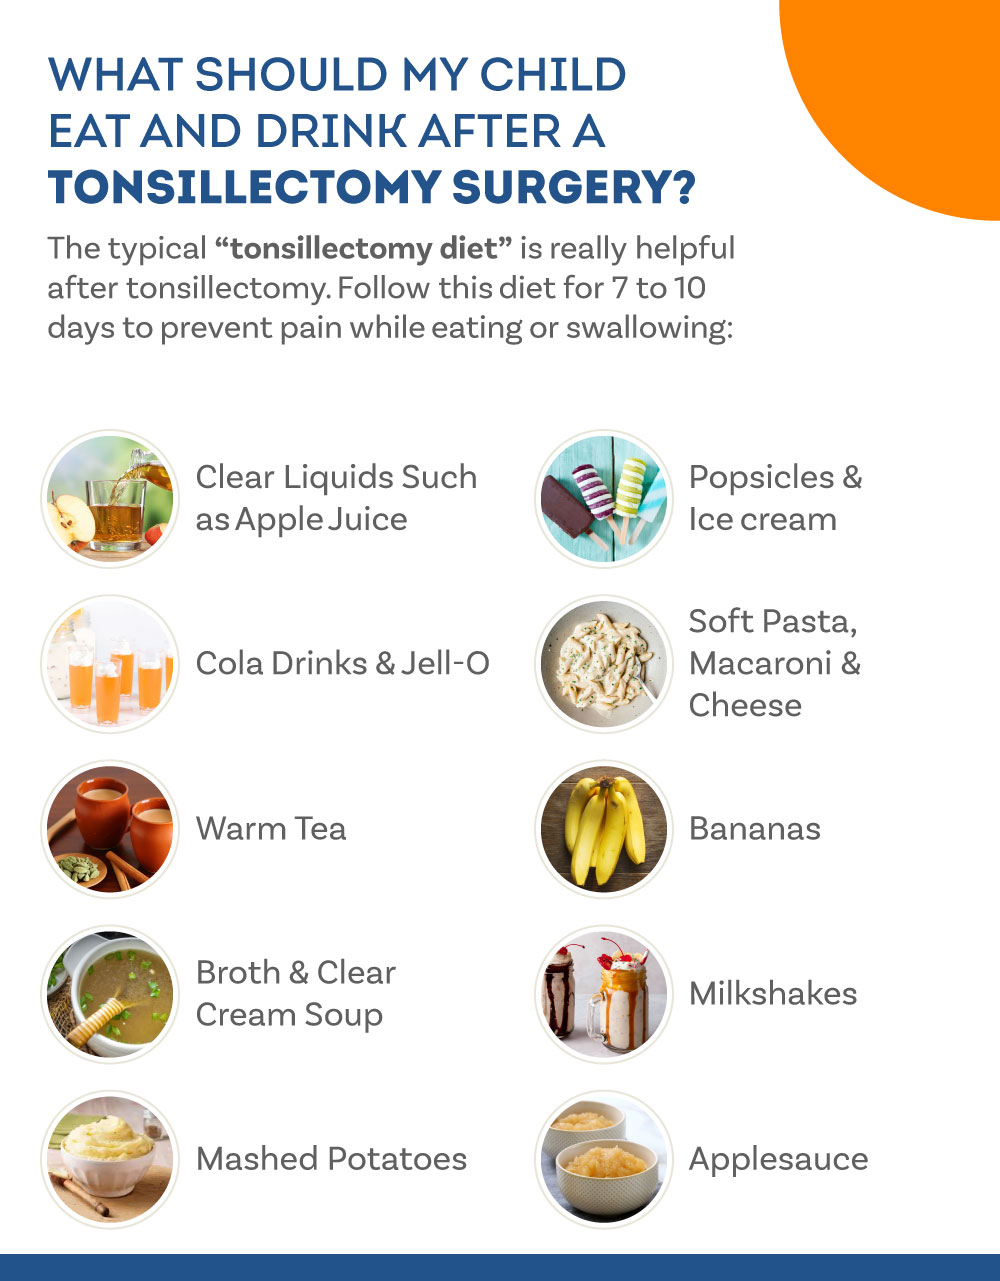 Foods and drinks to give to your child after tonsillectomy